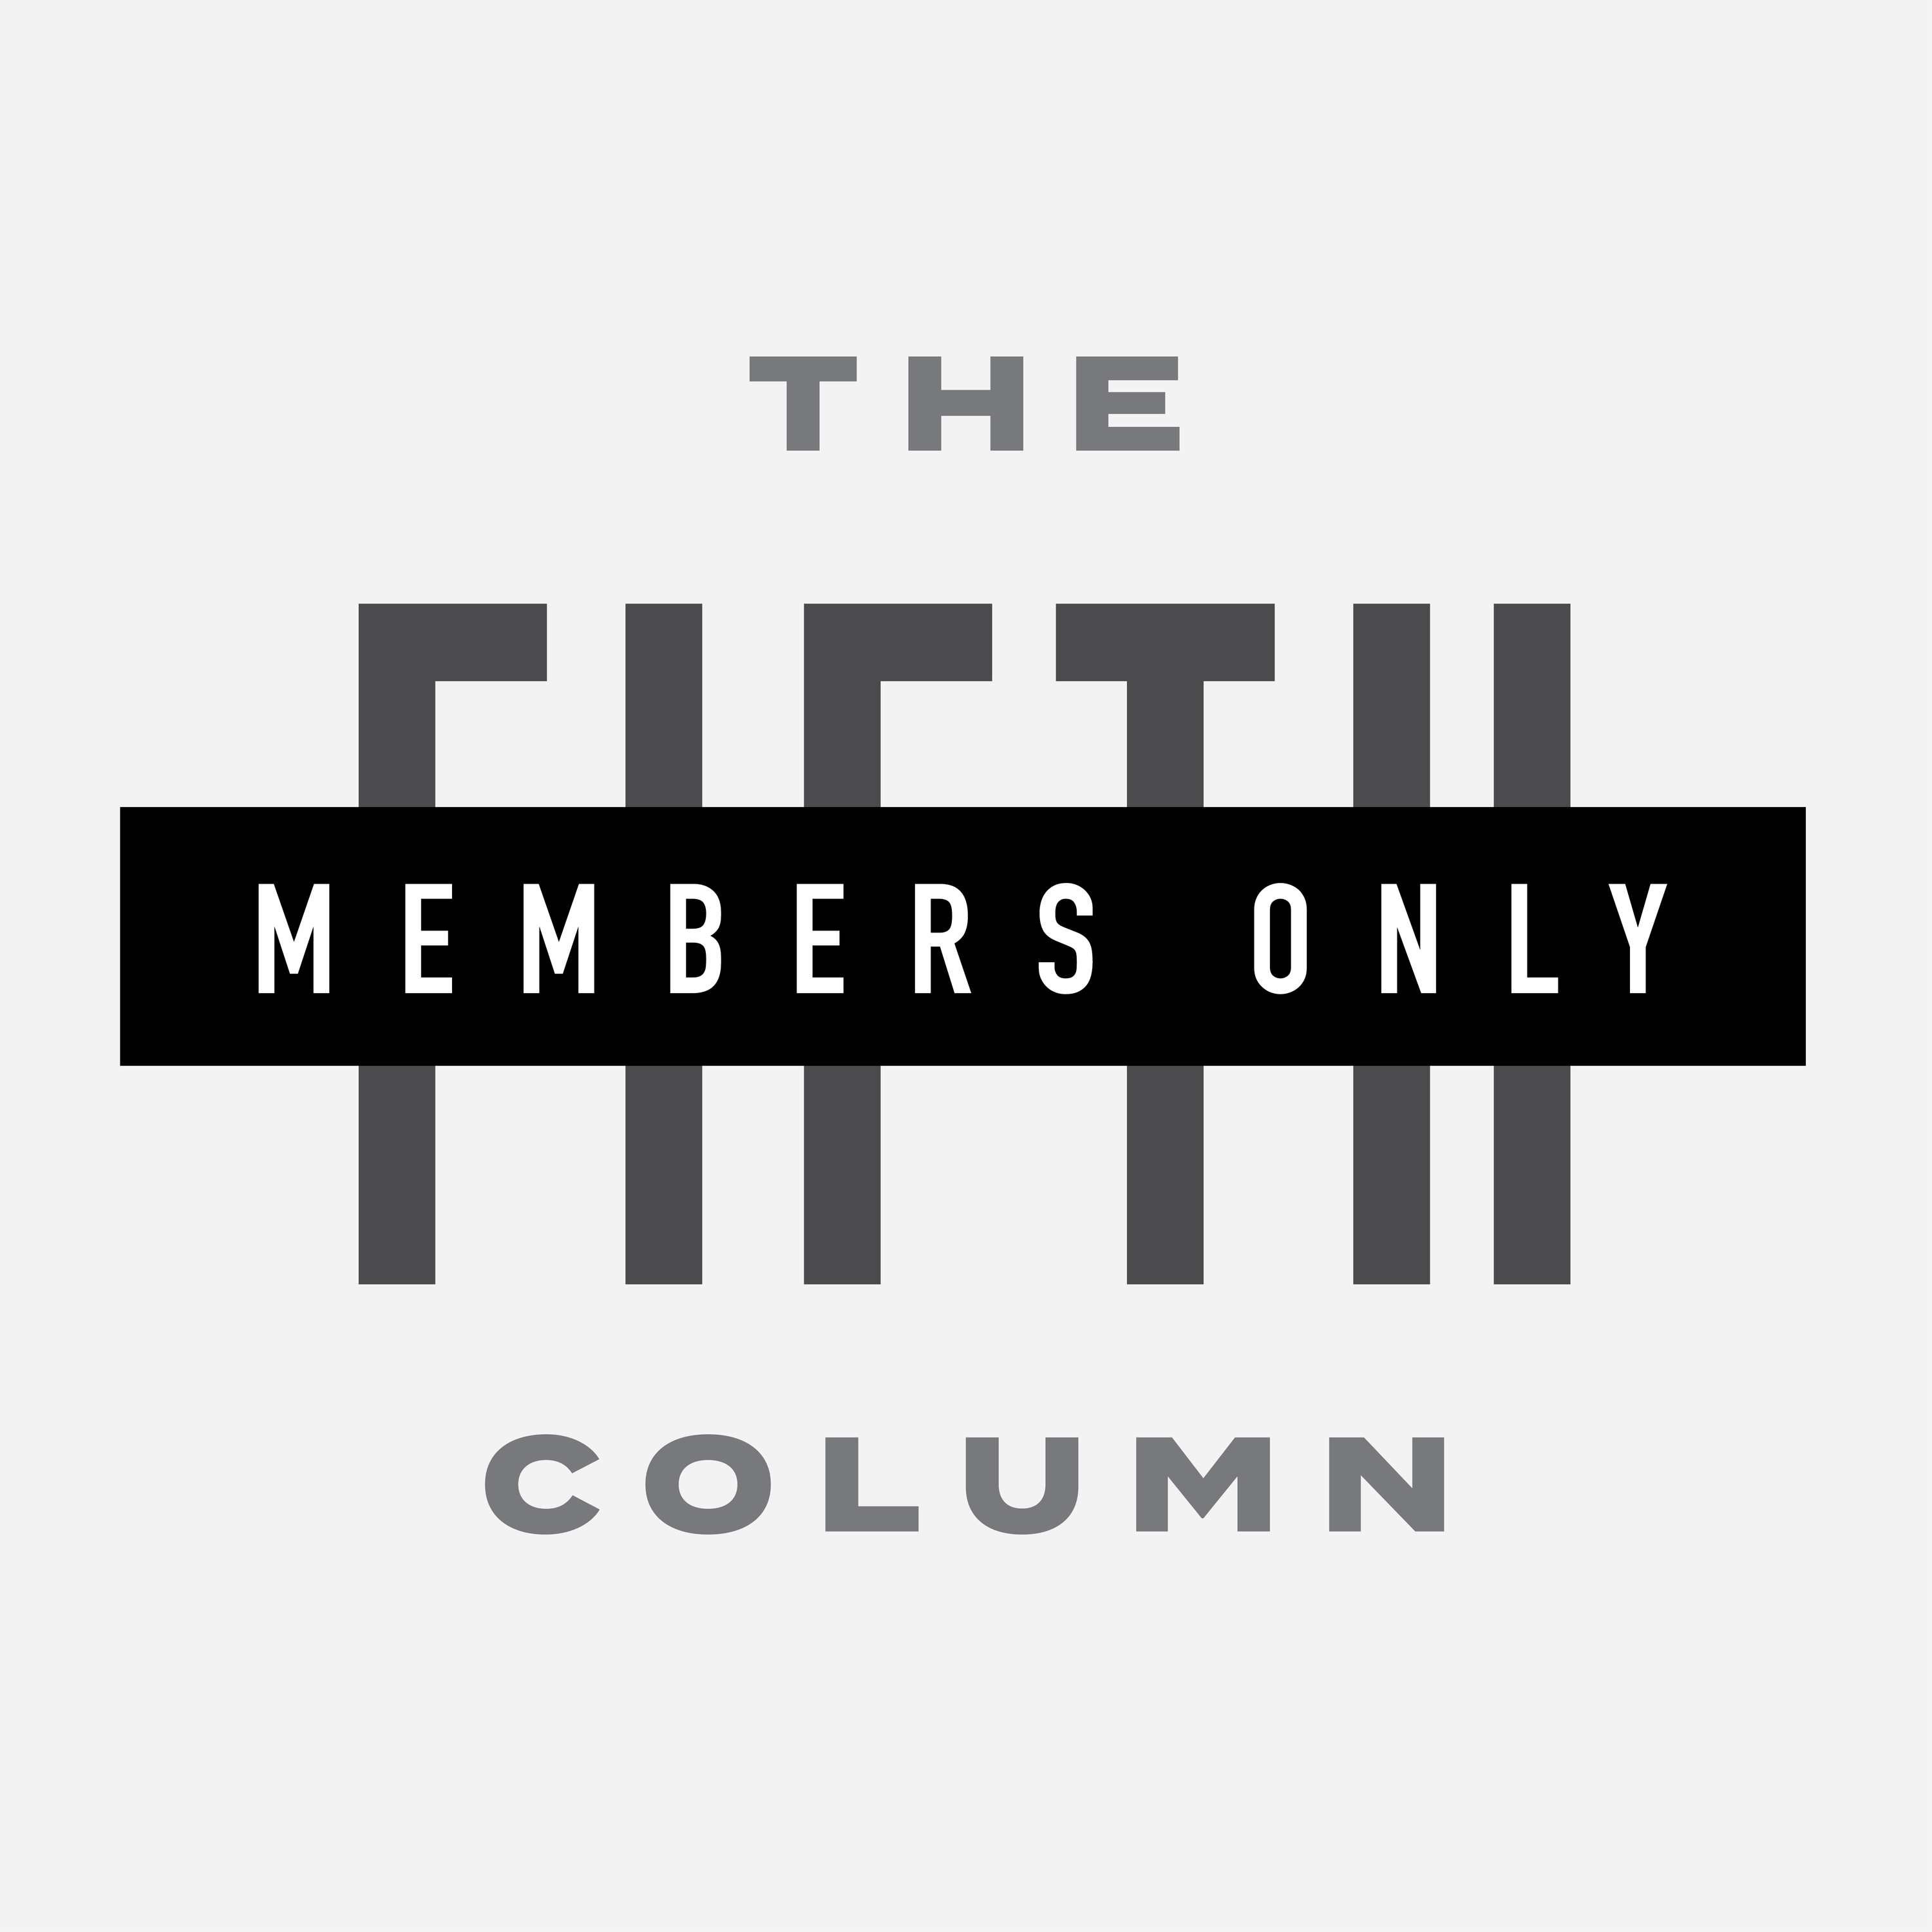 Members Only #198 - Everybody's a Critic (Vol. 144)